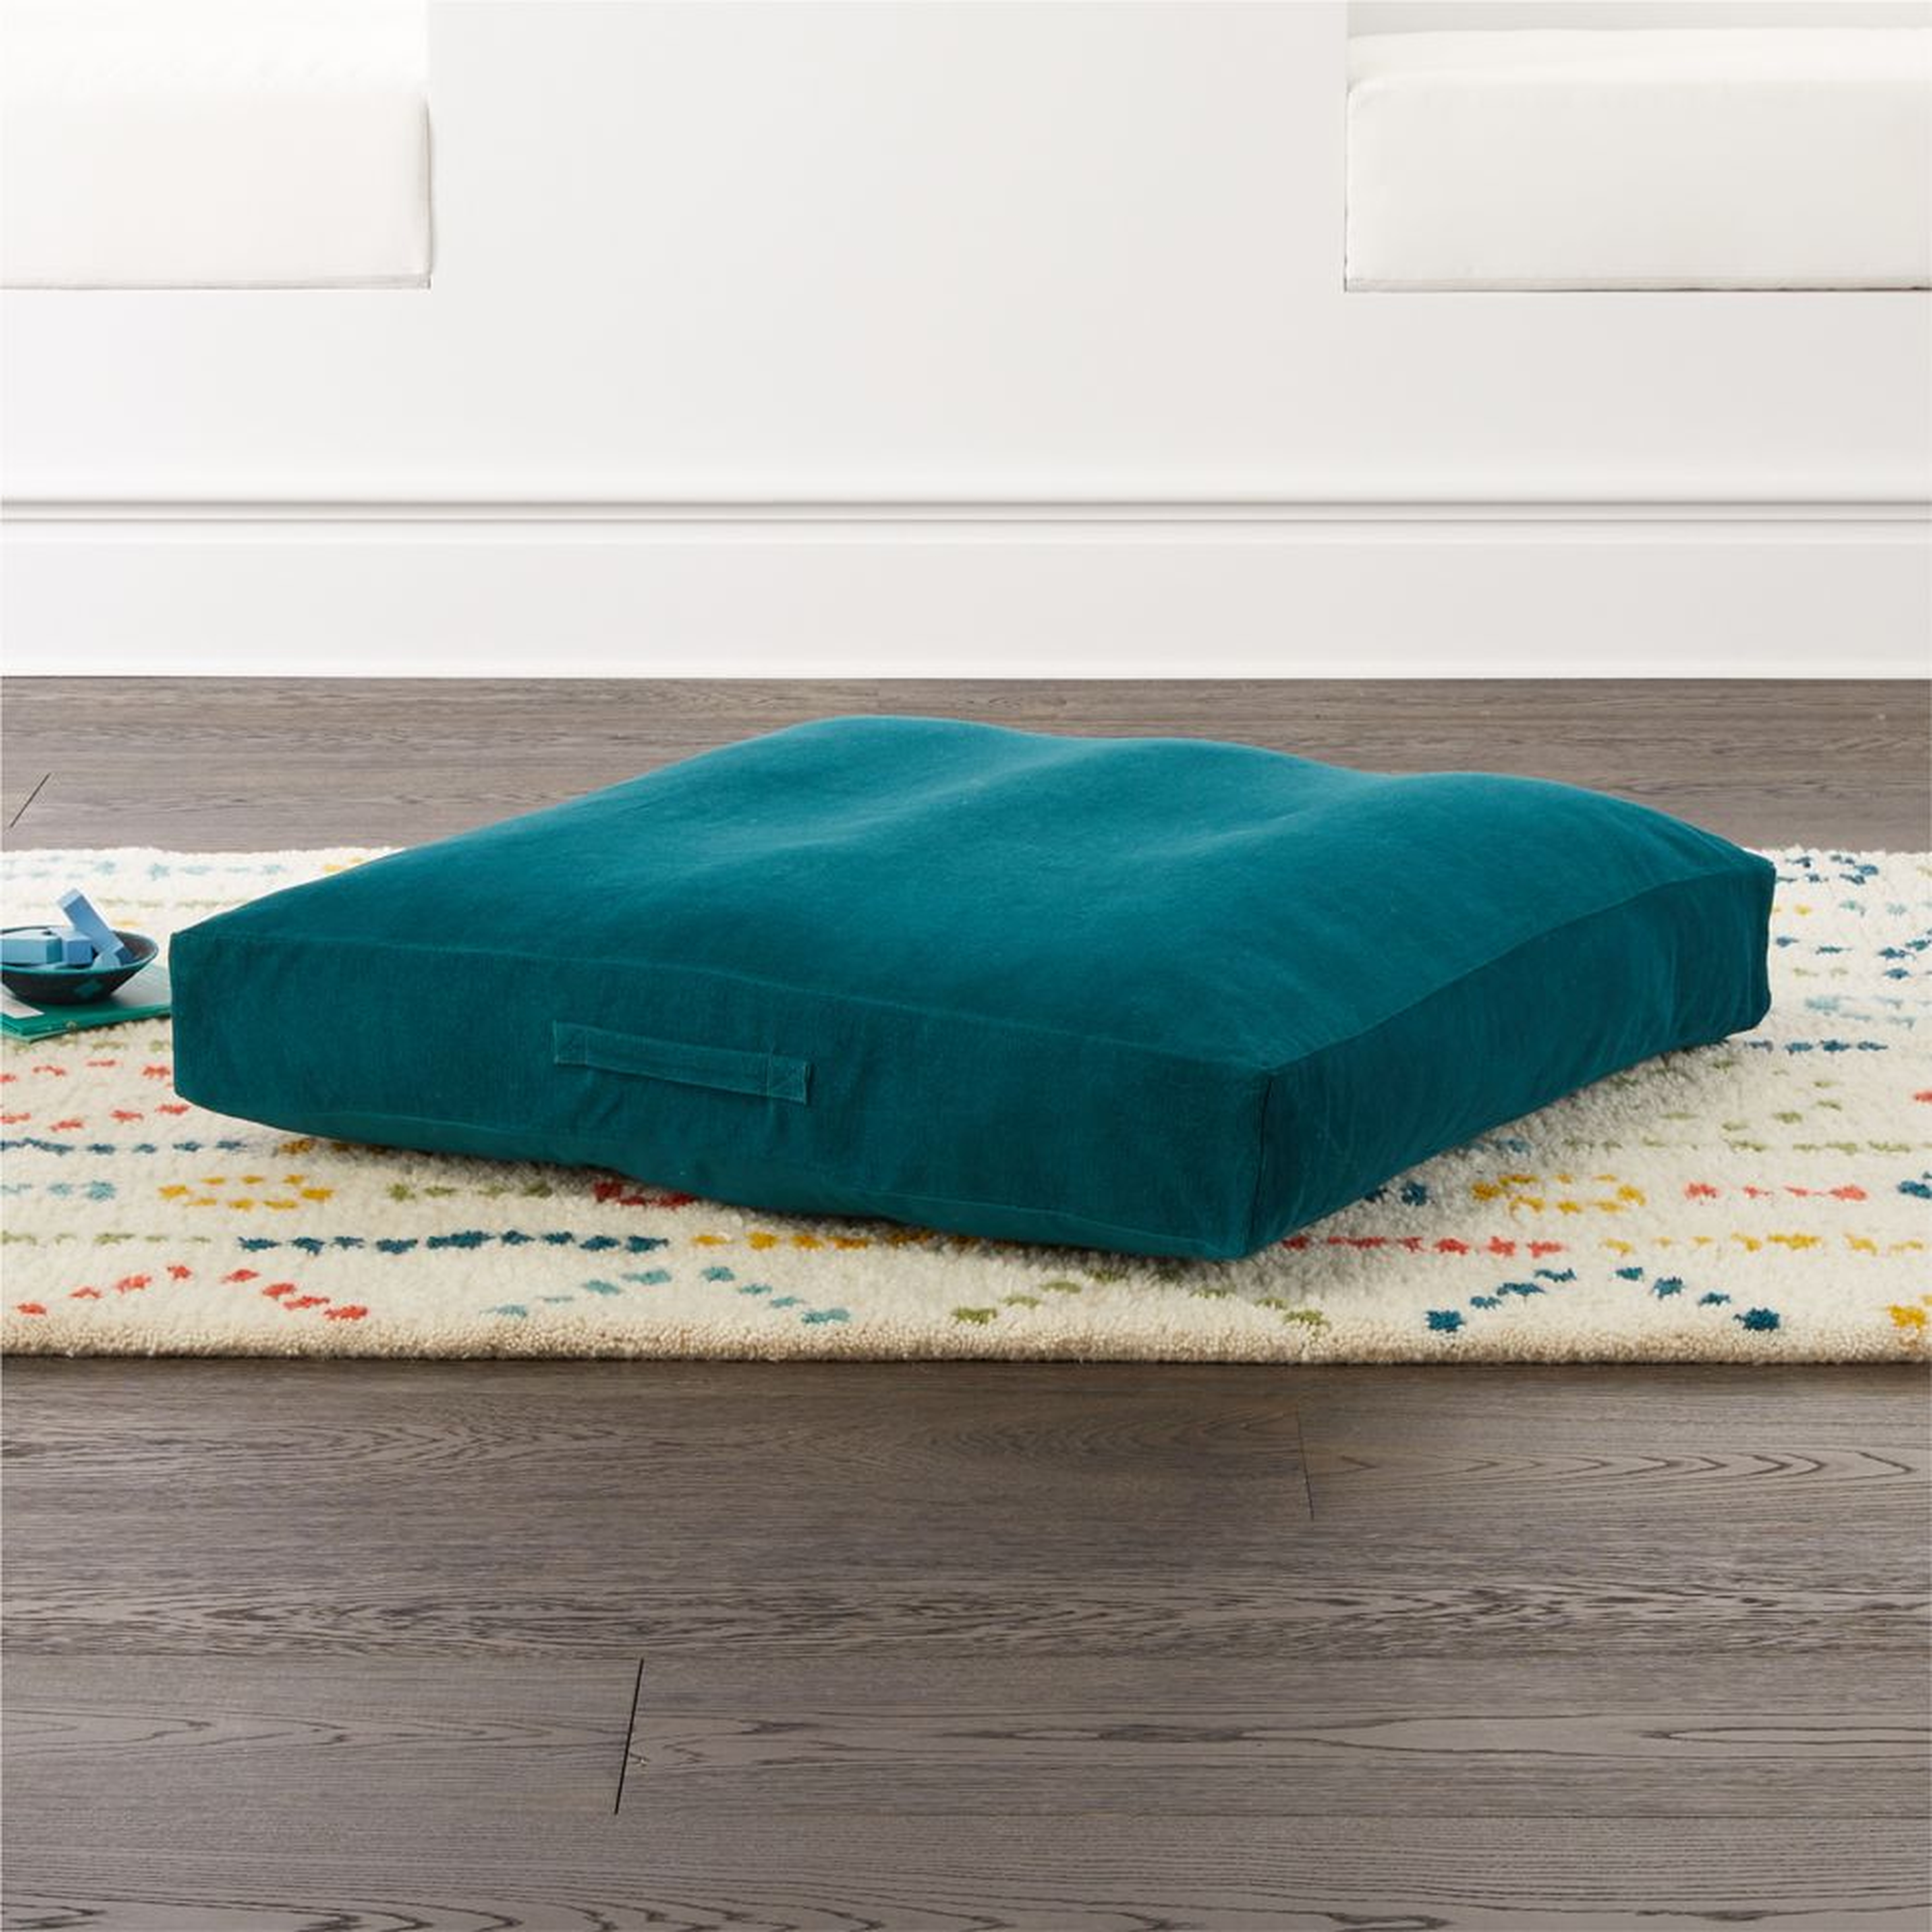 Teal Corduroy Cushion - Crate and Barrel